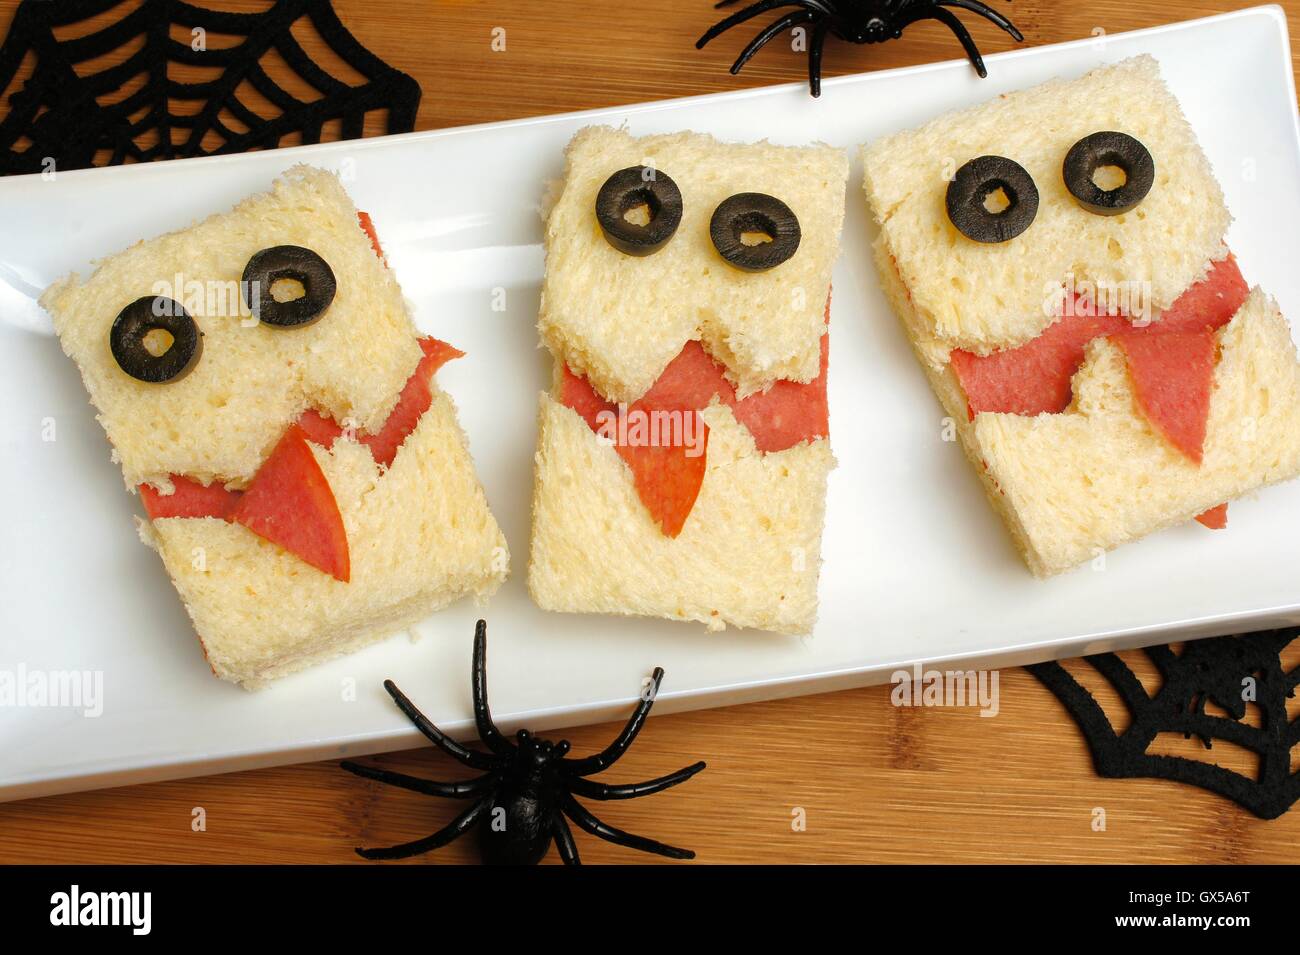 Fun Halloween monster sandwiches on a plate with wood background Stock Photo